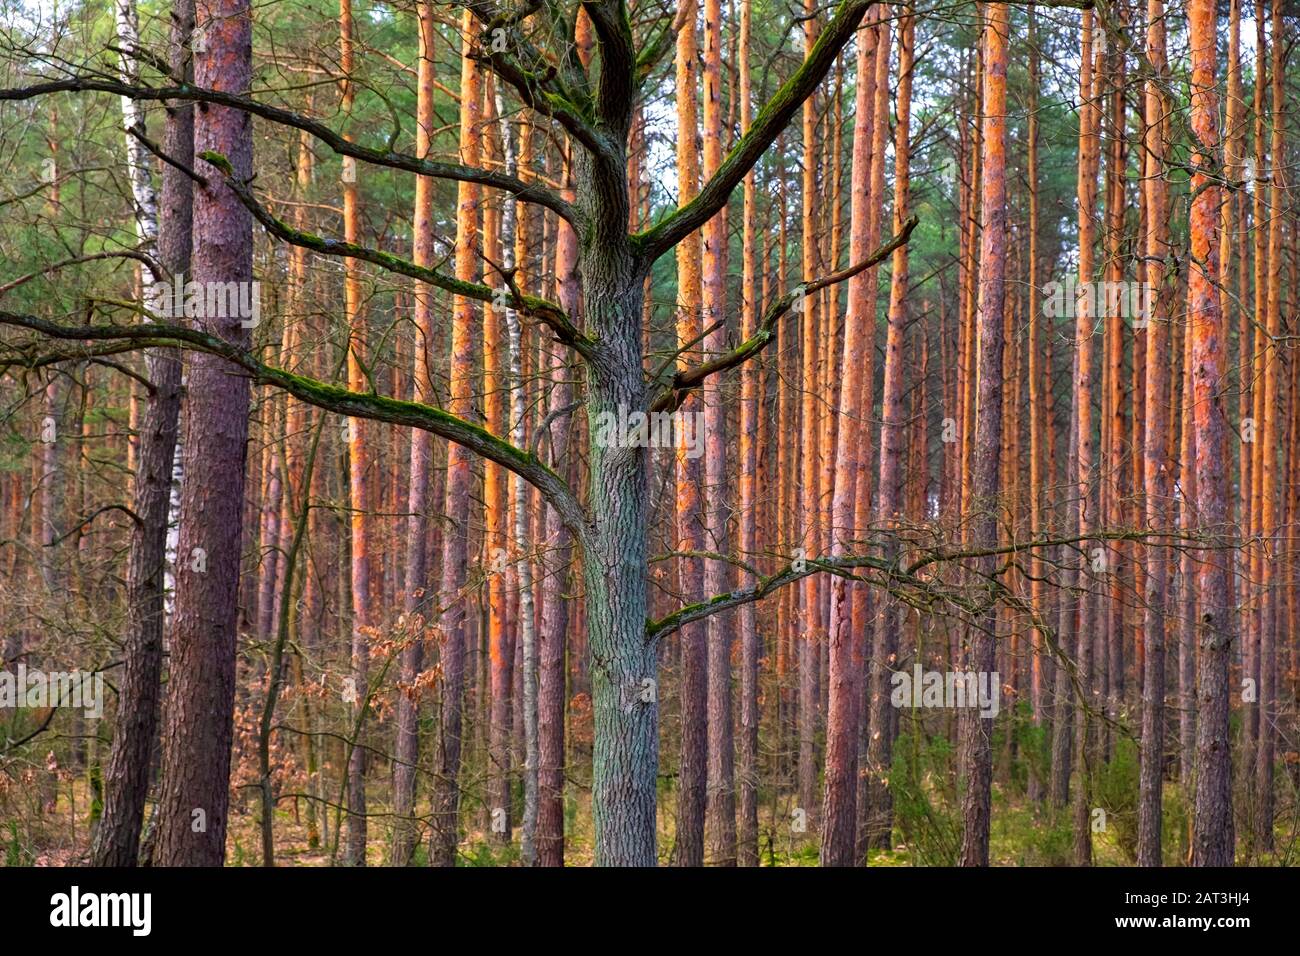 Winter landscape of a central European mixed wood forest in the Mazovia region of Poland, within the Kampinoski National Park territory. Stock Photo